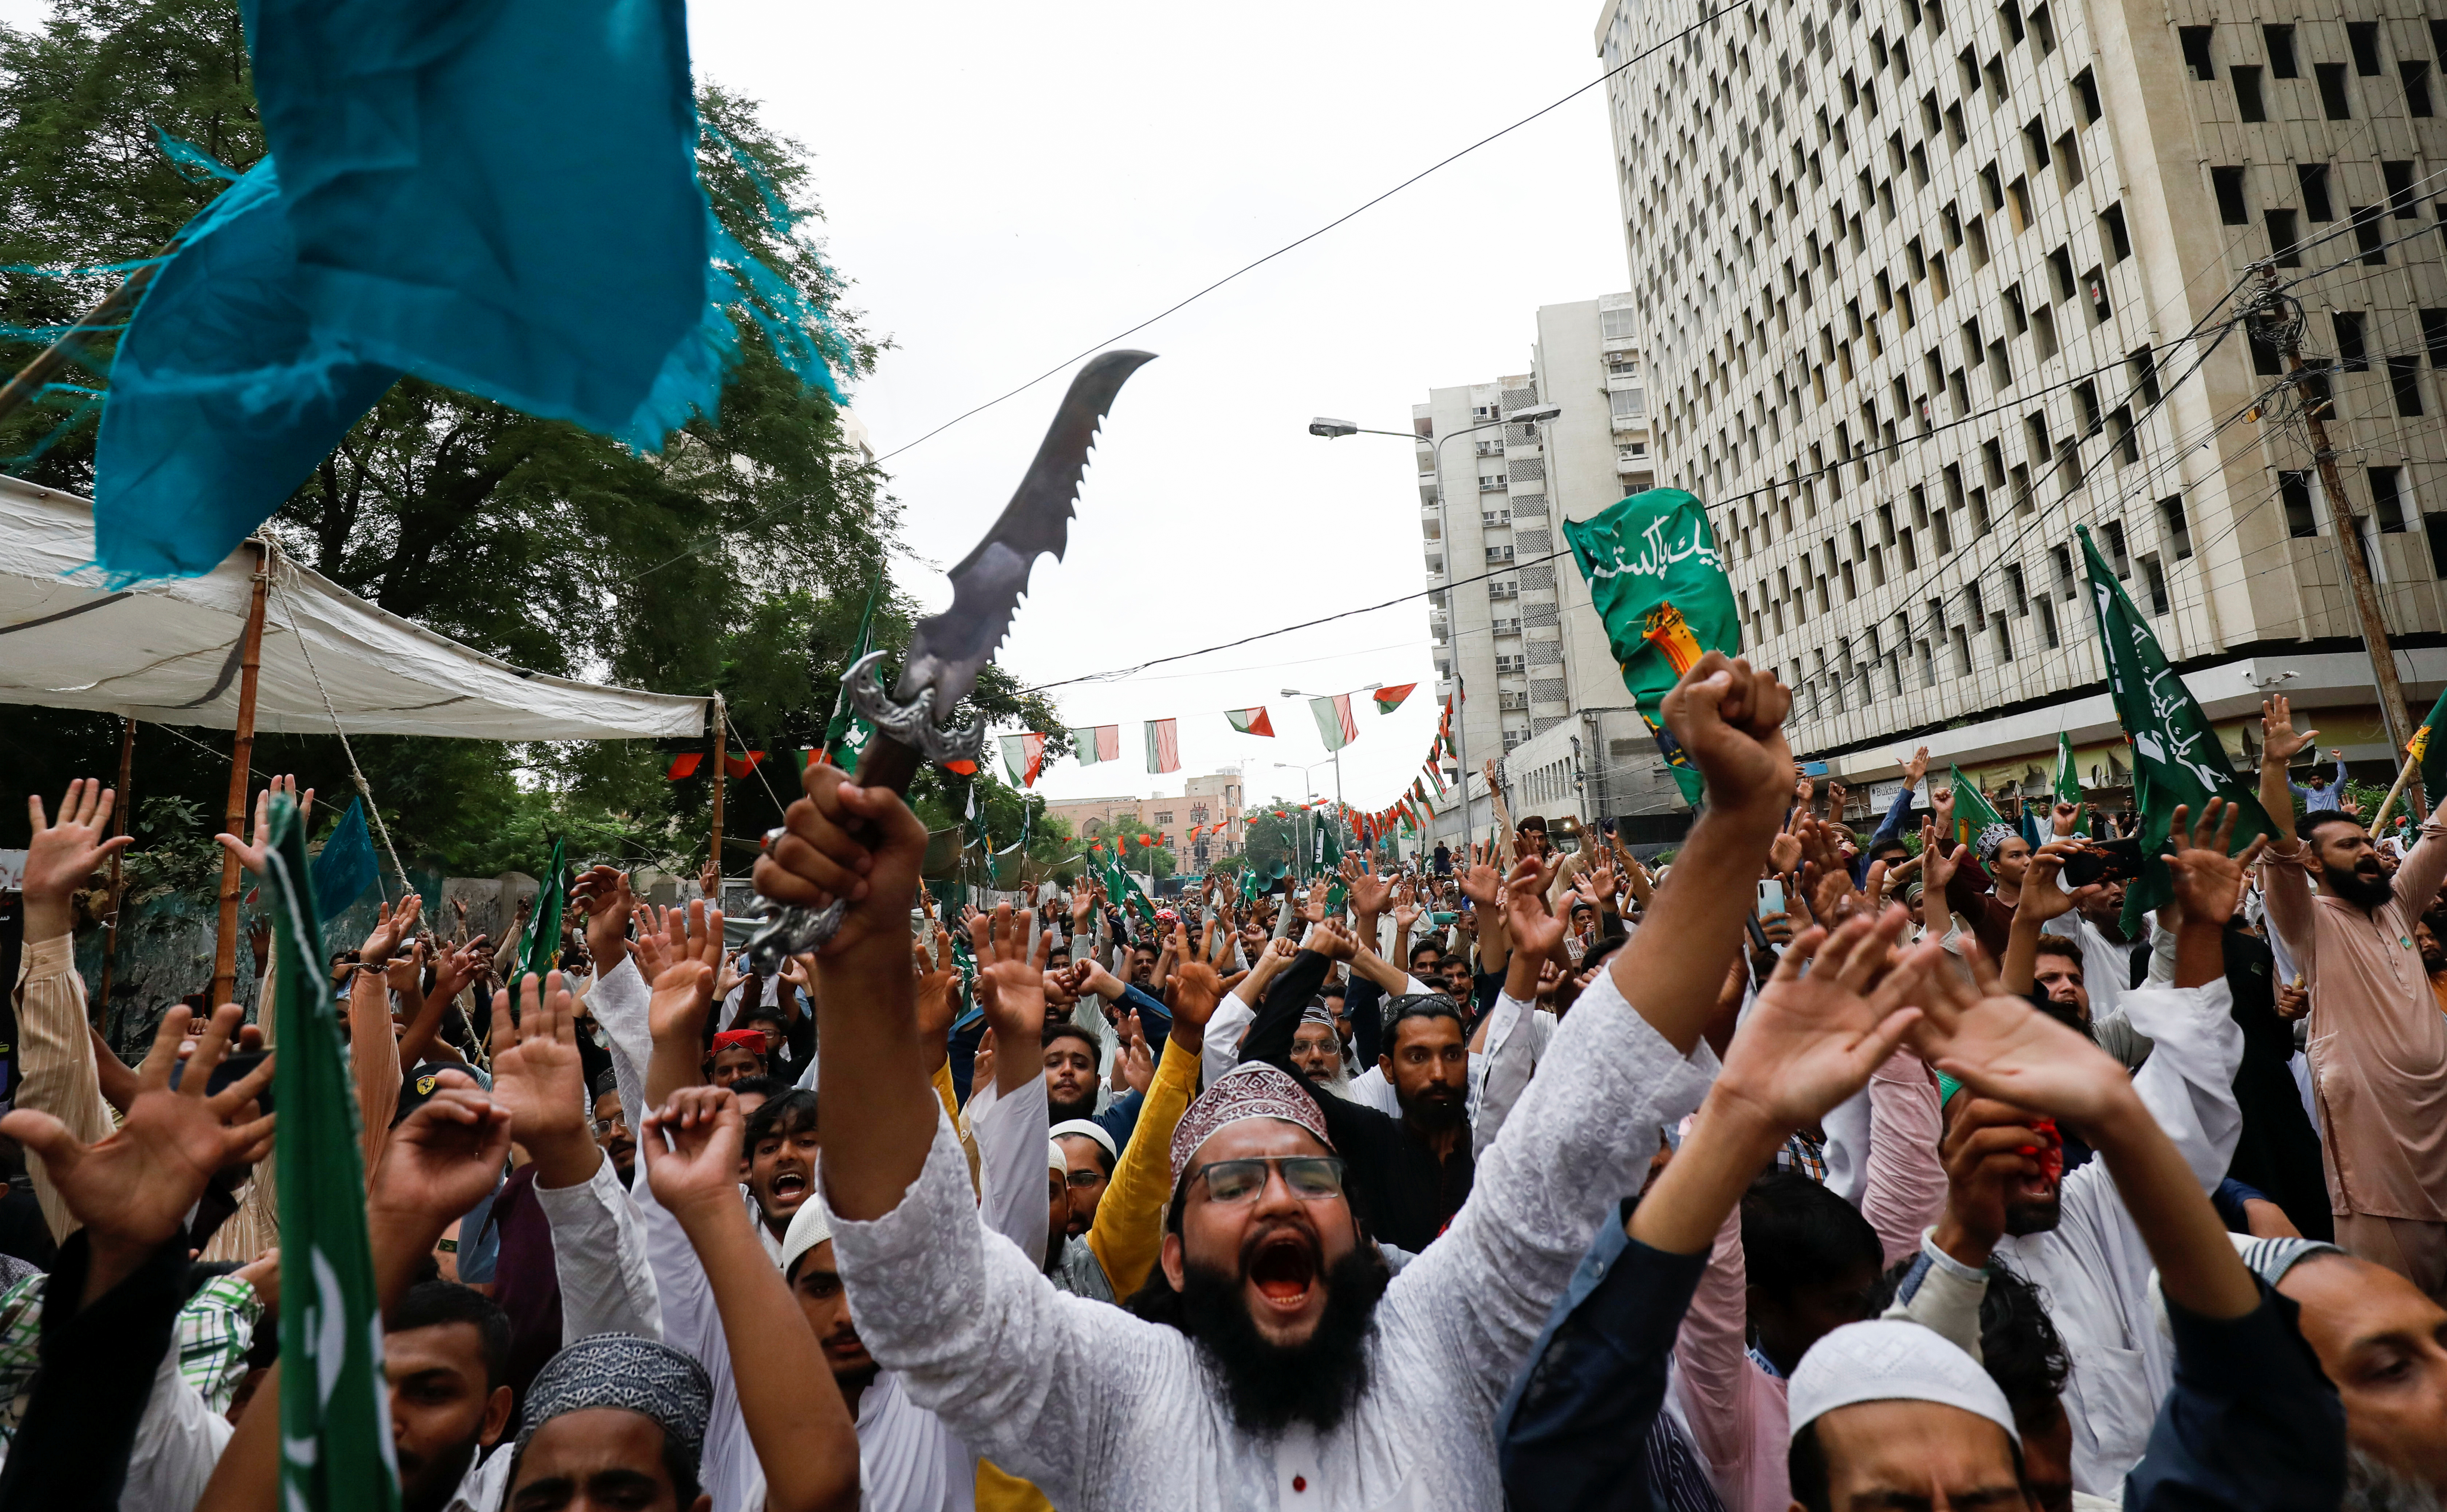 A supporter of religious and political party Tehreek-e-Labaik Pakistan (TLP) waves a dagger, as he chants slogans with others against the satirical French weekly newspaper Charlie Hebdo, which reprinted a cartoon of the Prophet Mohammad, during a protest in Karachi, Pakistan September 4, 2020. Photo: Reuters